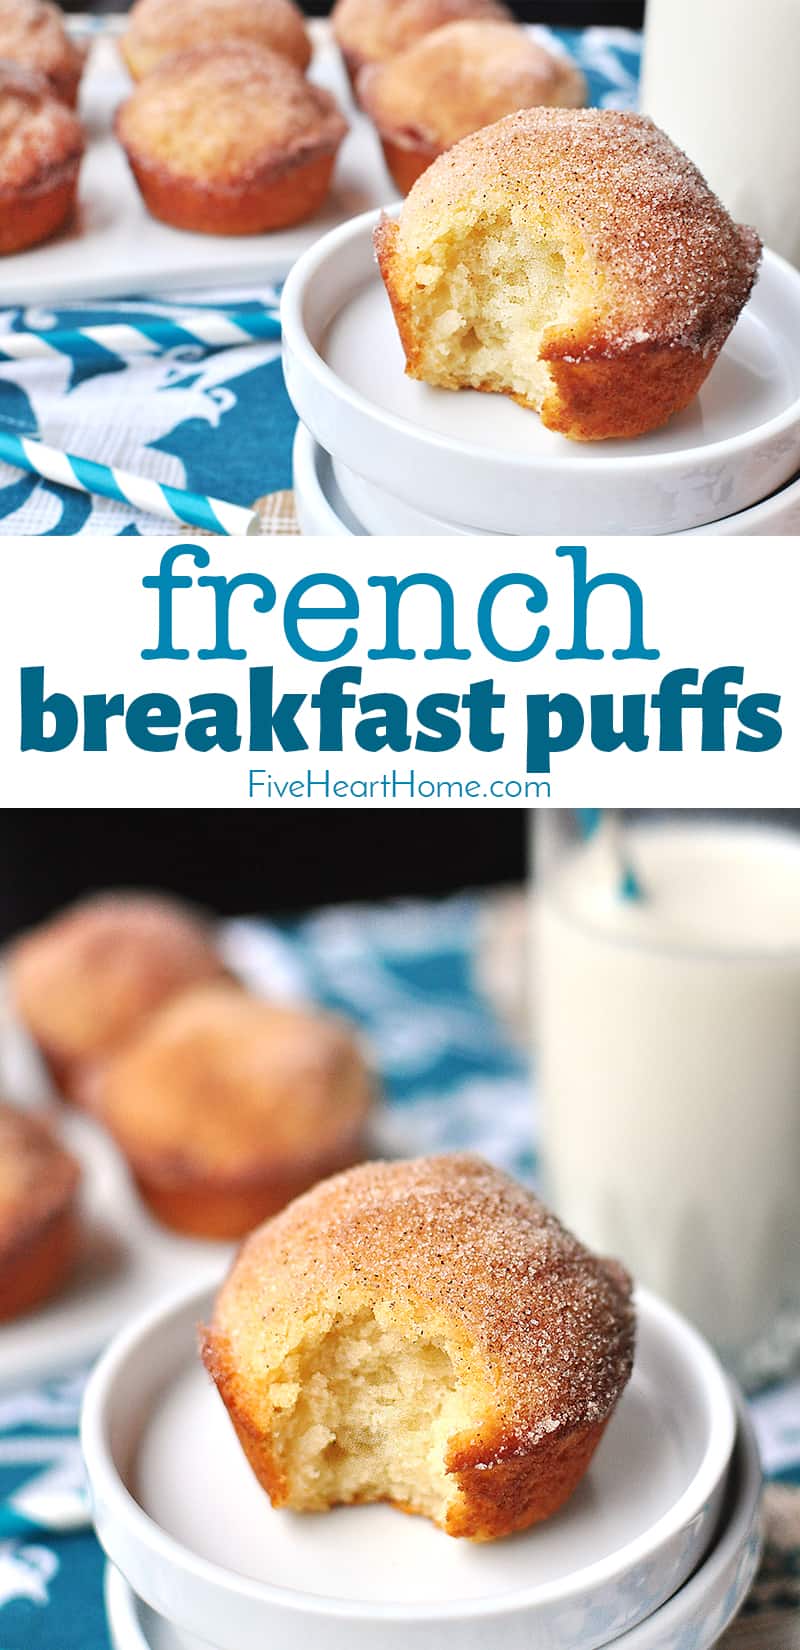 French Breakfast Puffs ~ tender vanilla muffins drenched in melted butter and dipped in cinnamon sugar for a sweet and crunchy coating that makes breakfast time a treat! | FiveHeartHome.com via @fivehearthome